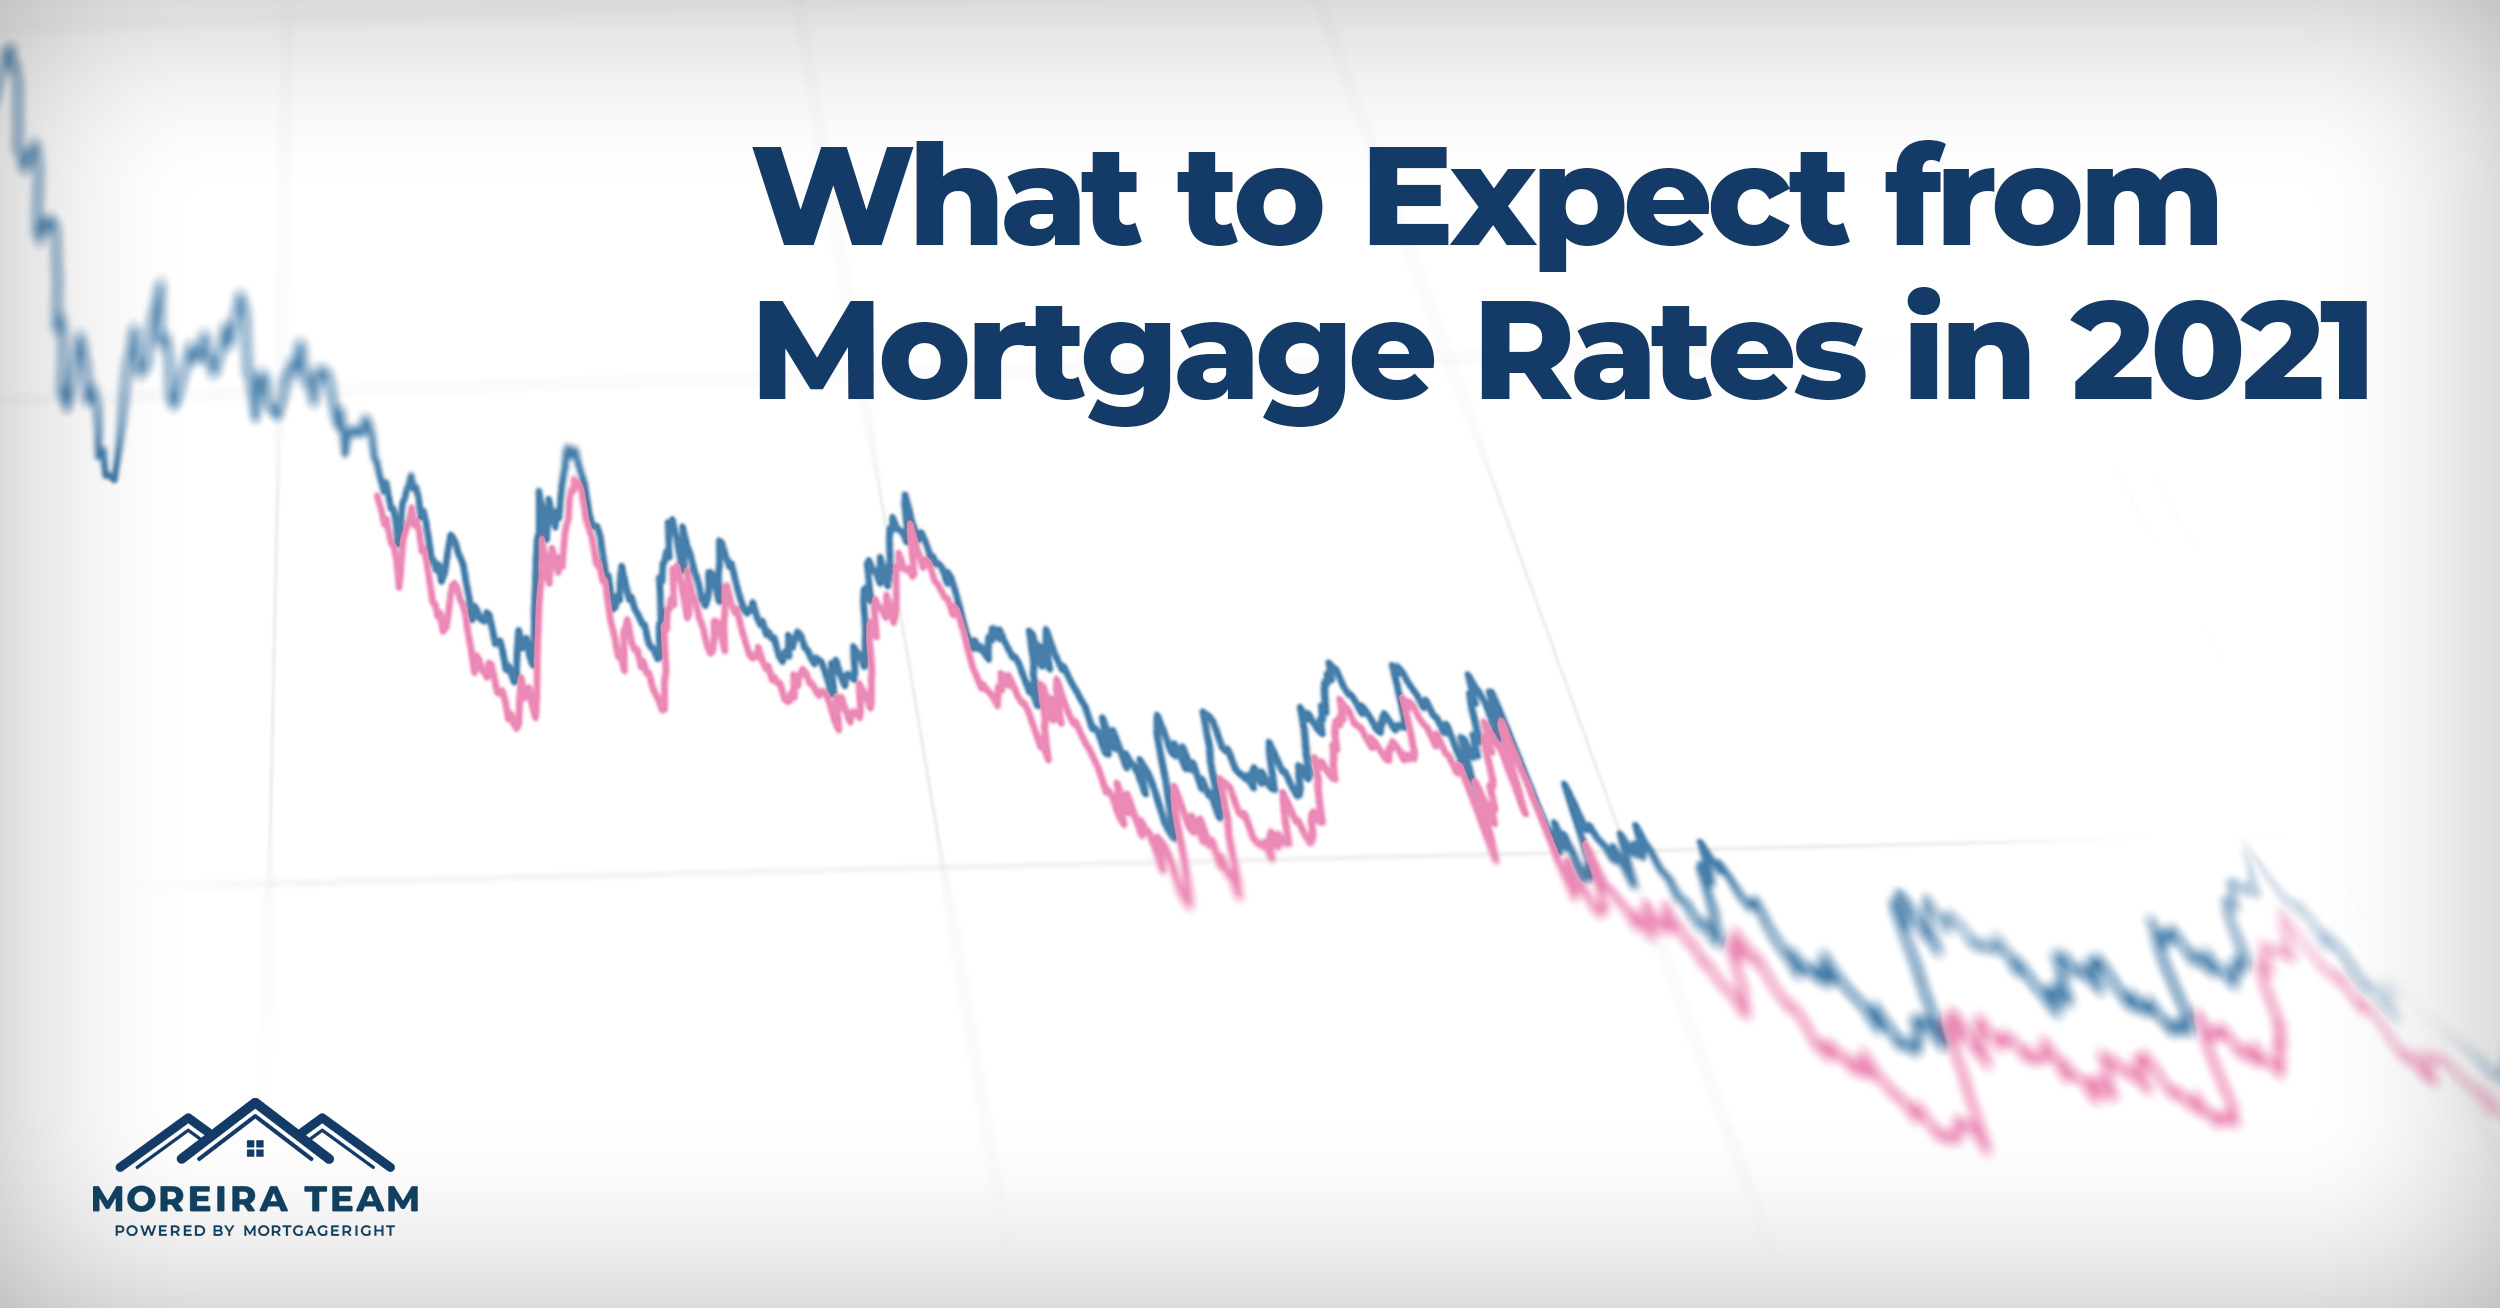 What to Expect from Mortgage Rates in 2021